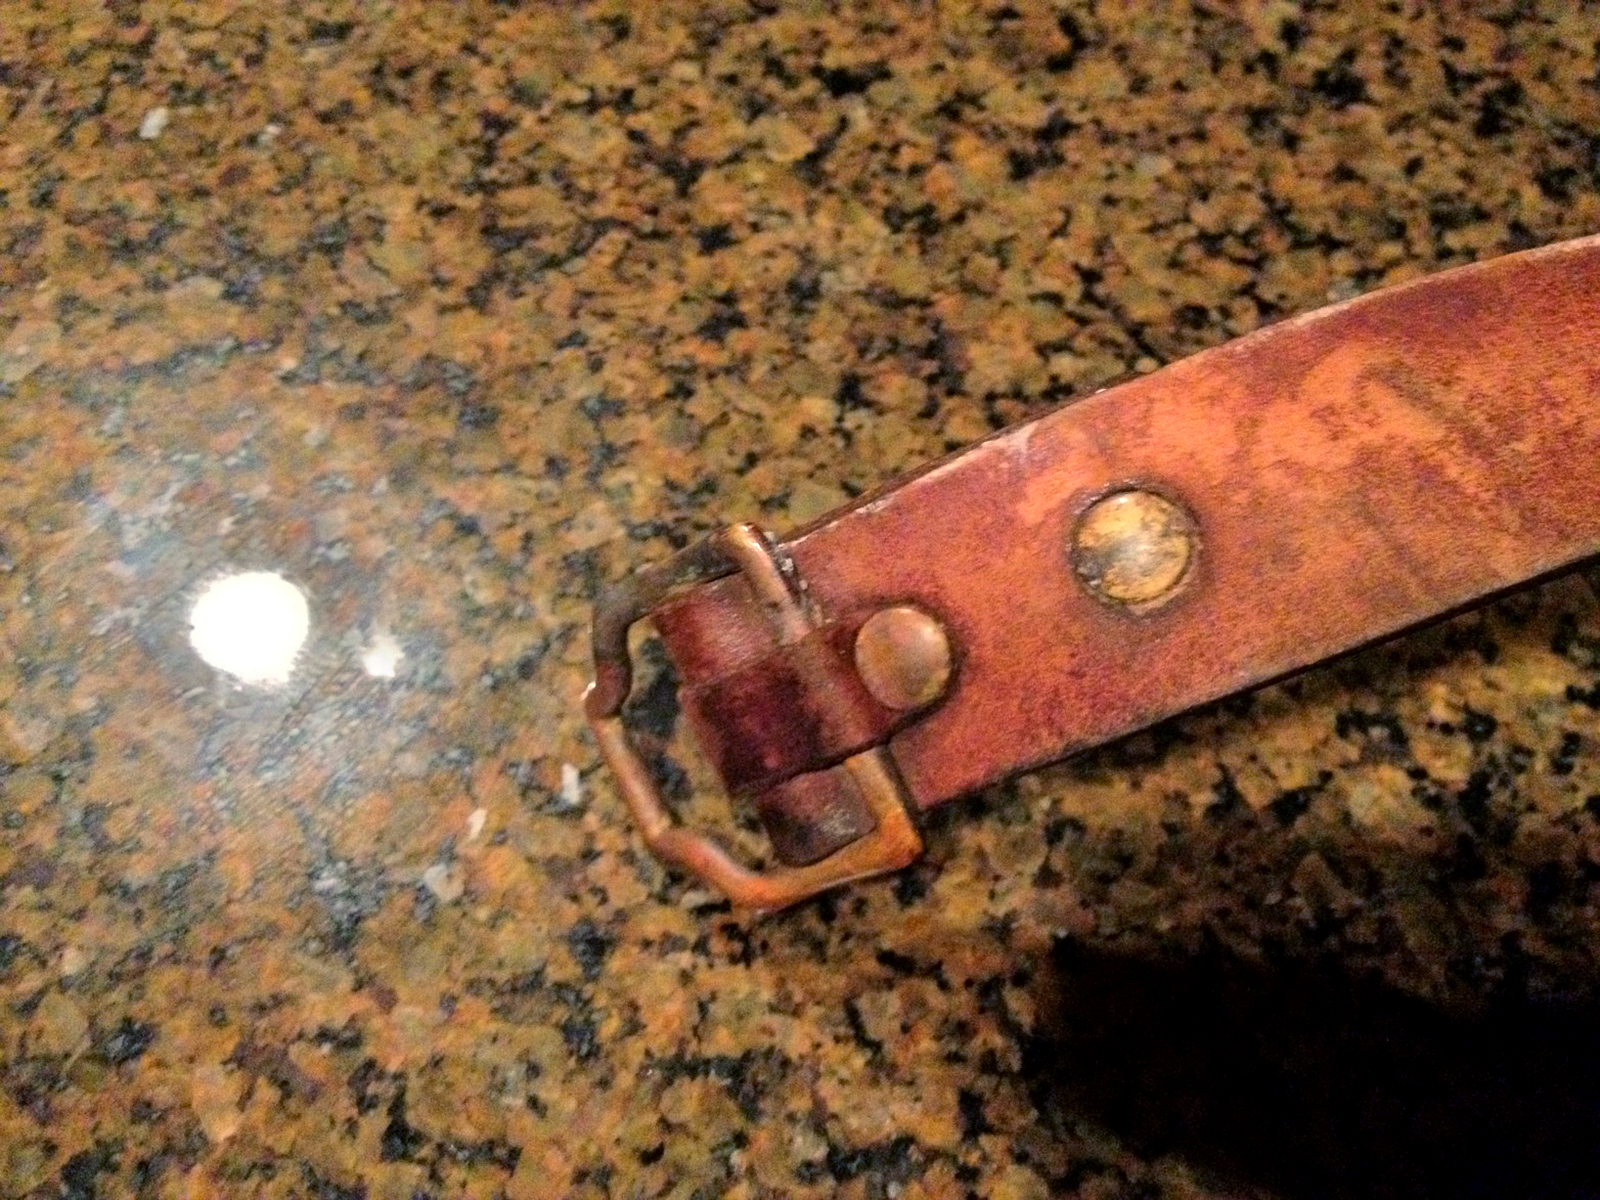 Worn, water-damaged No. 5 Cinch Belt, cleaned up, buckle